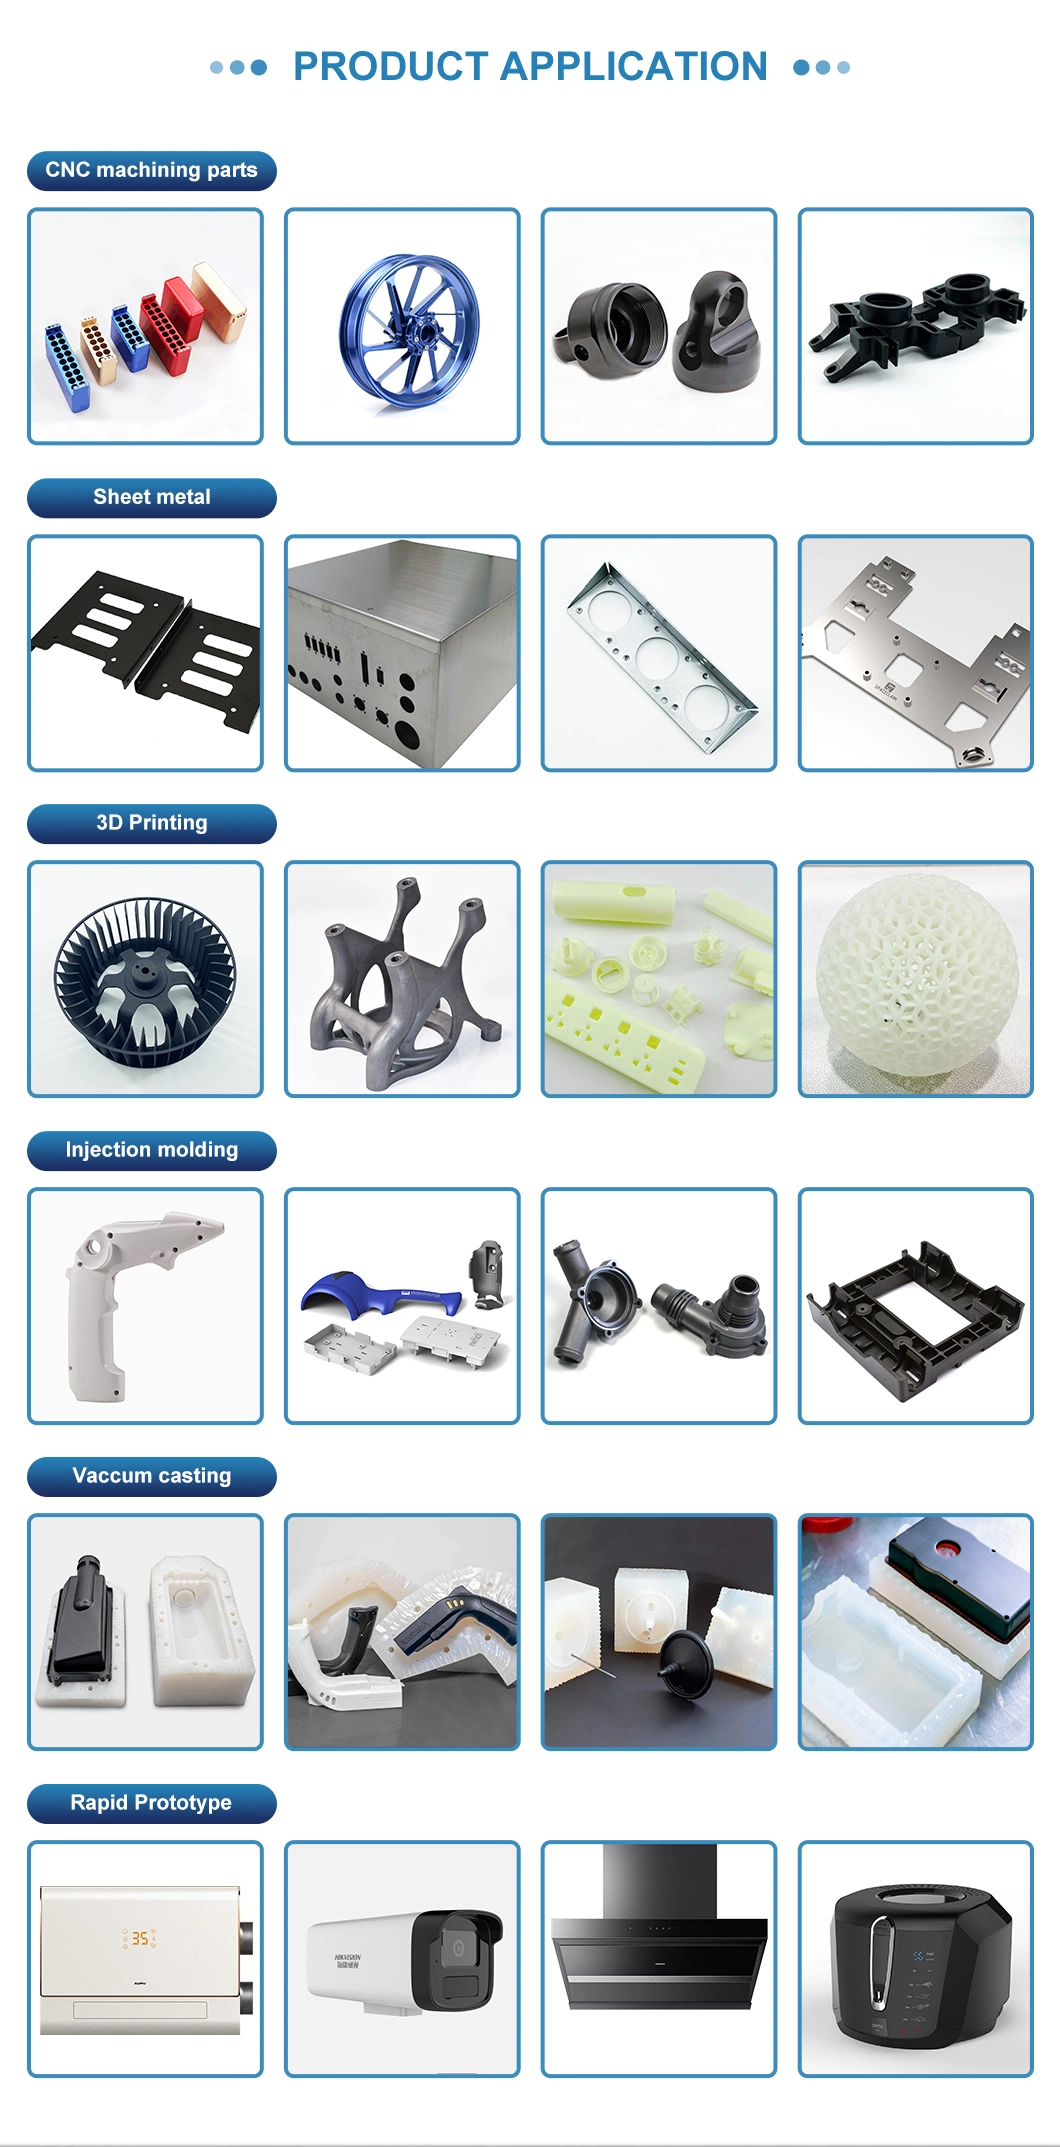 Cheap Factory Produces Customized Drawings, 3D Printing, Plastic Samples, SLS SLA 3D Rapid Prototyping